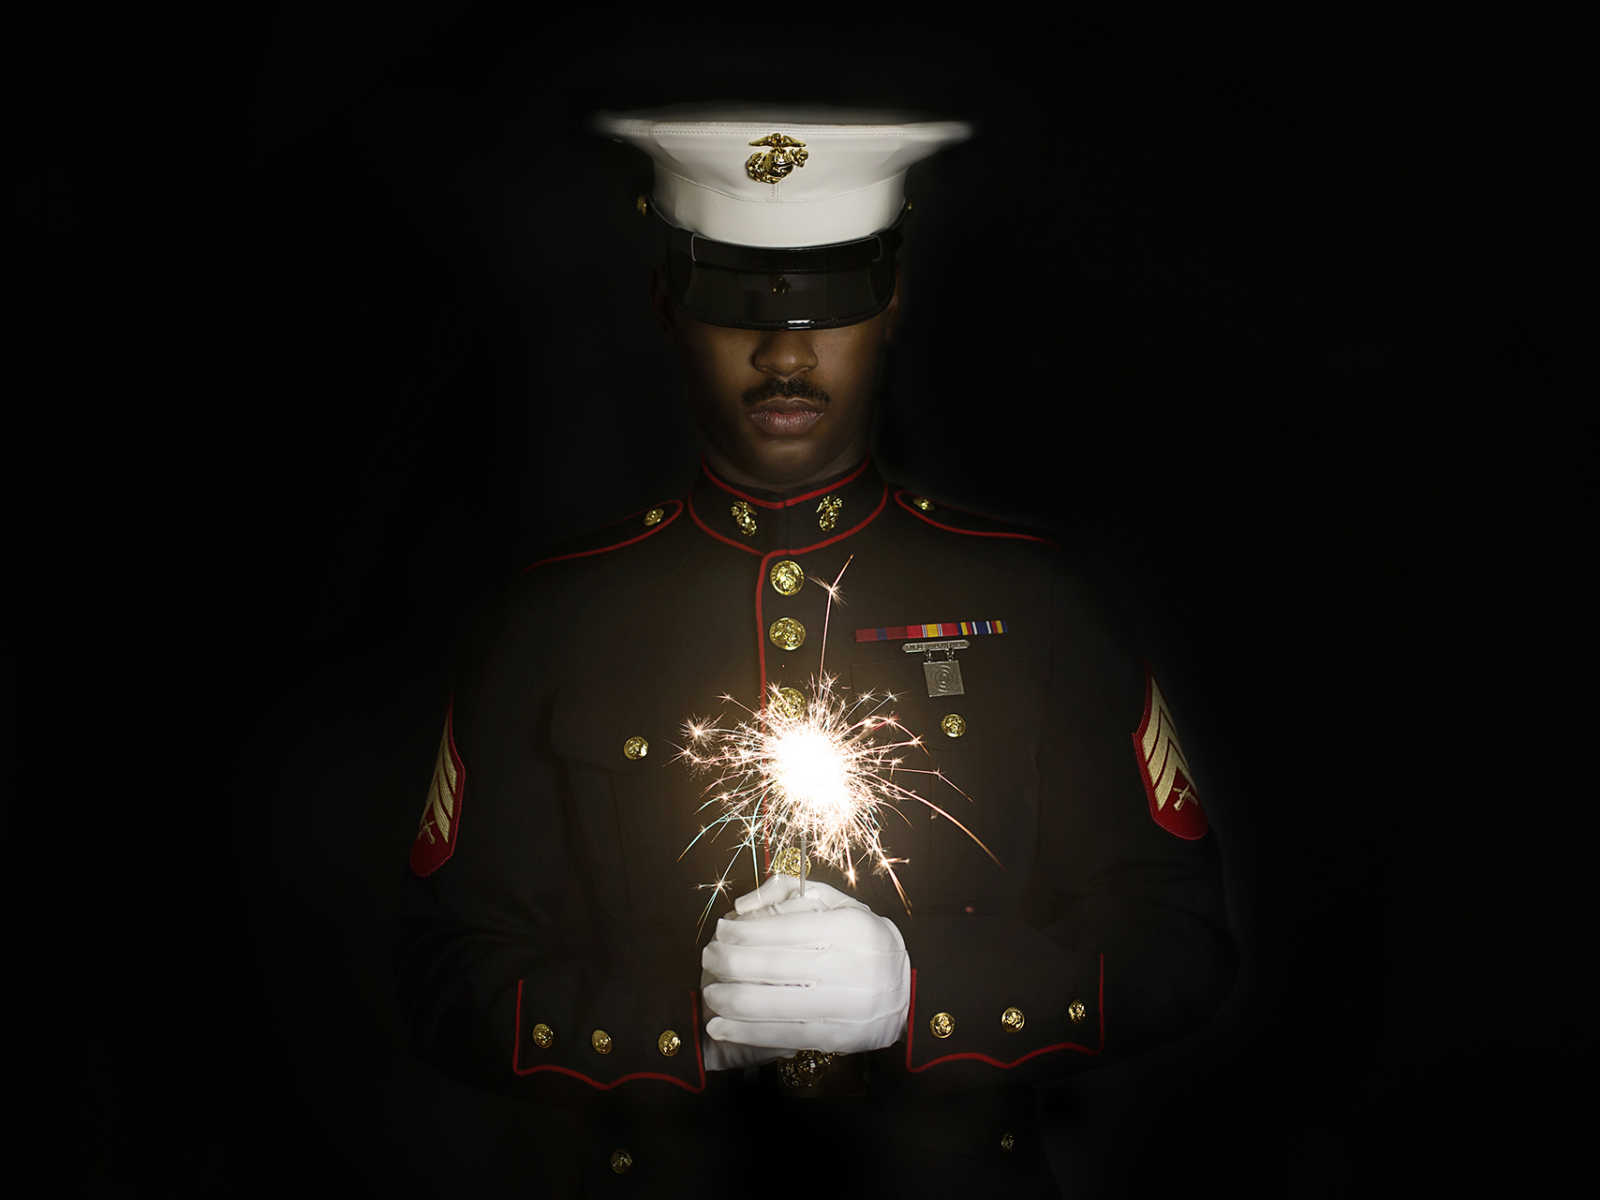 marine husband is in uniform holding a sparkler which is the only thing lighting up his face